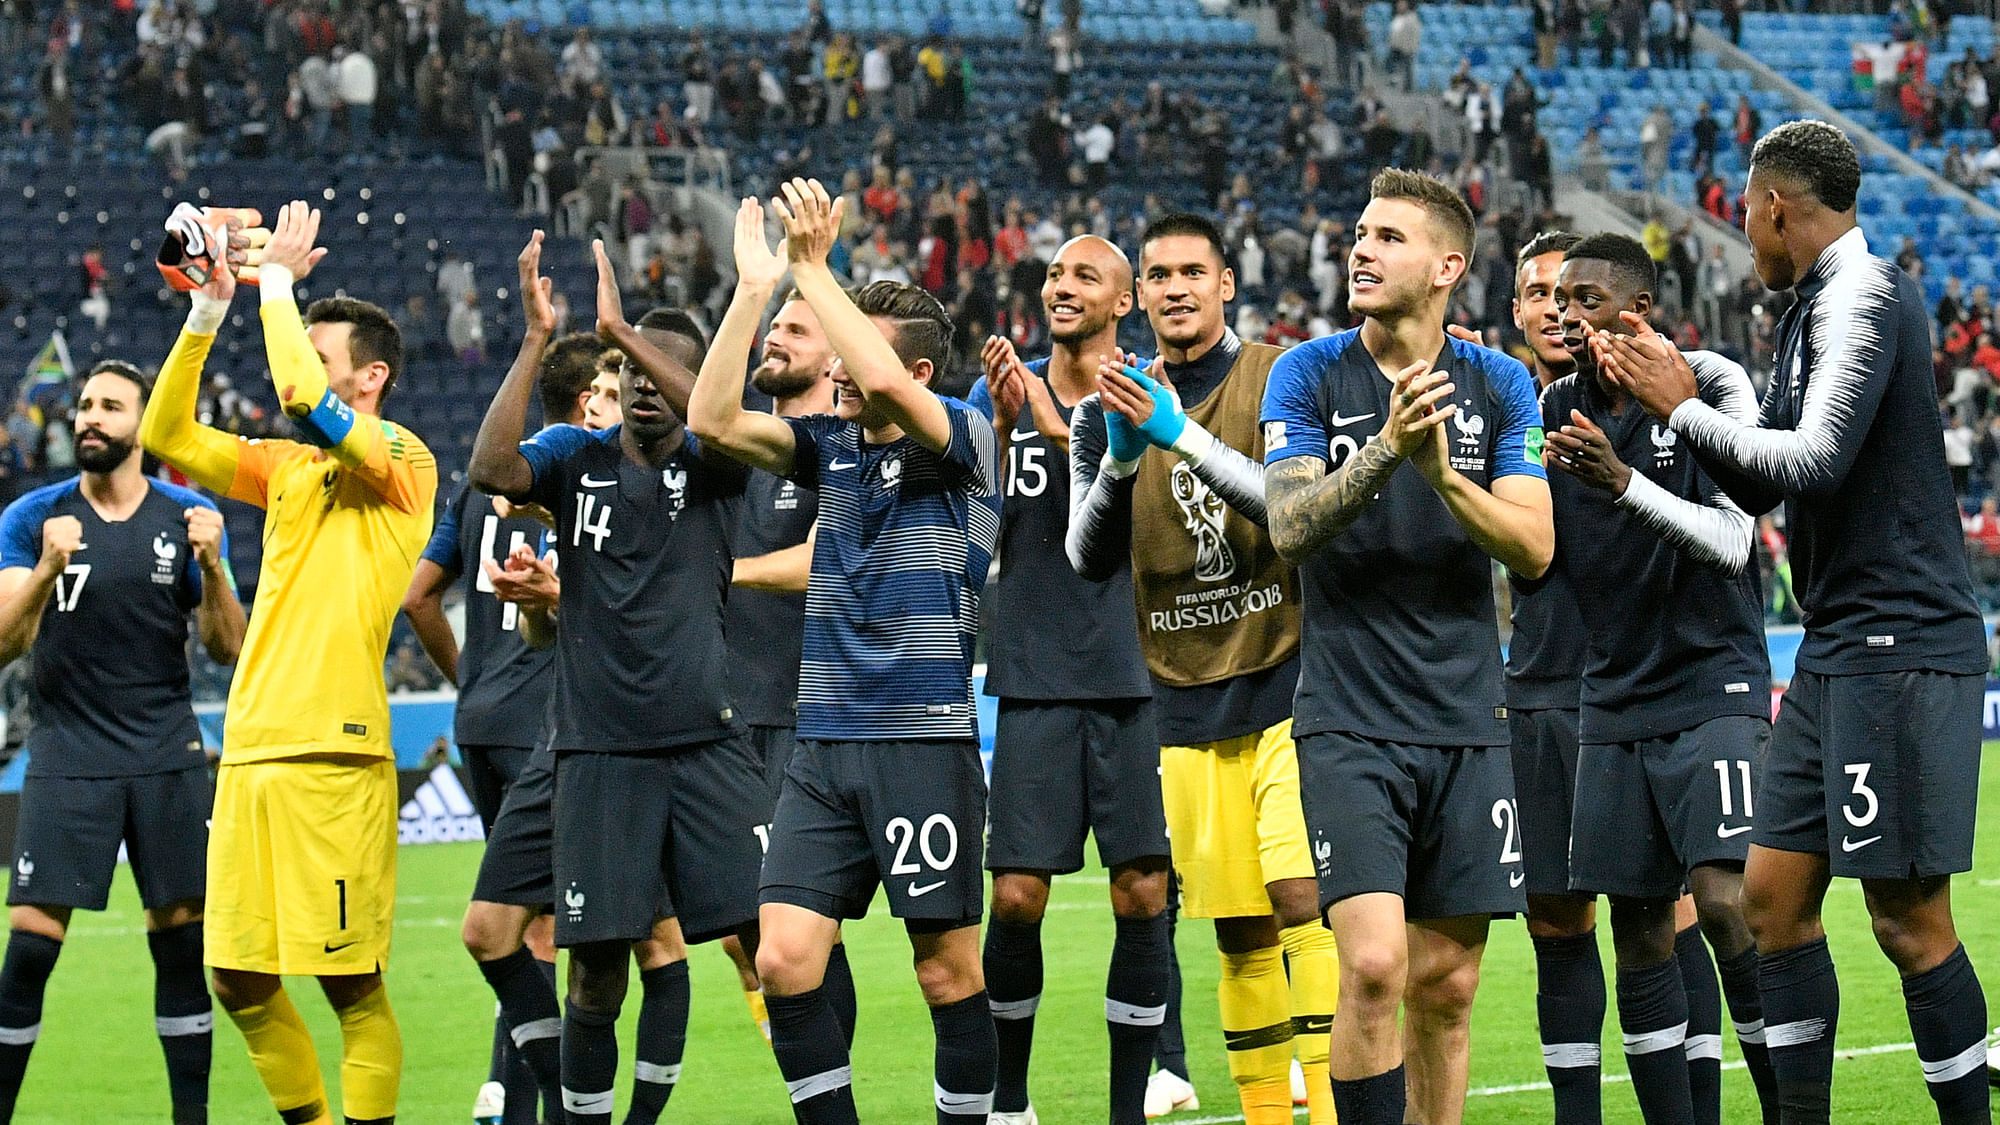 French players acknowledge their fans after their team advanced to the final during the semifinal match between France and Belgium at the 2018 soccer World Cup in the St. Petersburg Stadium in St. Petersburg, Russia, Tuesday, July 10, 2018.&nbsp;